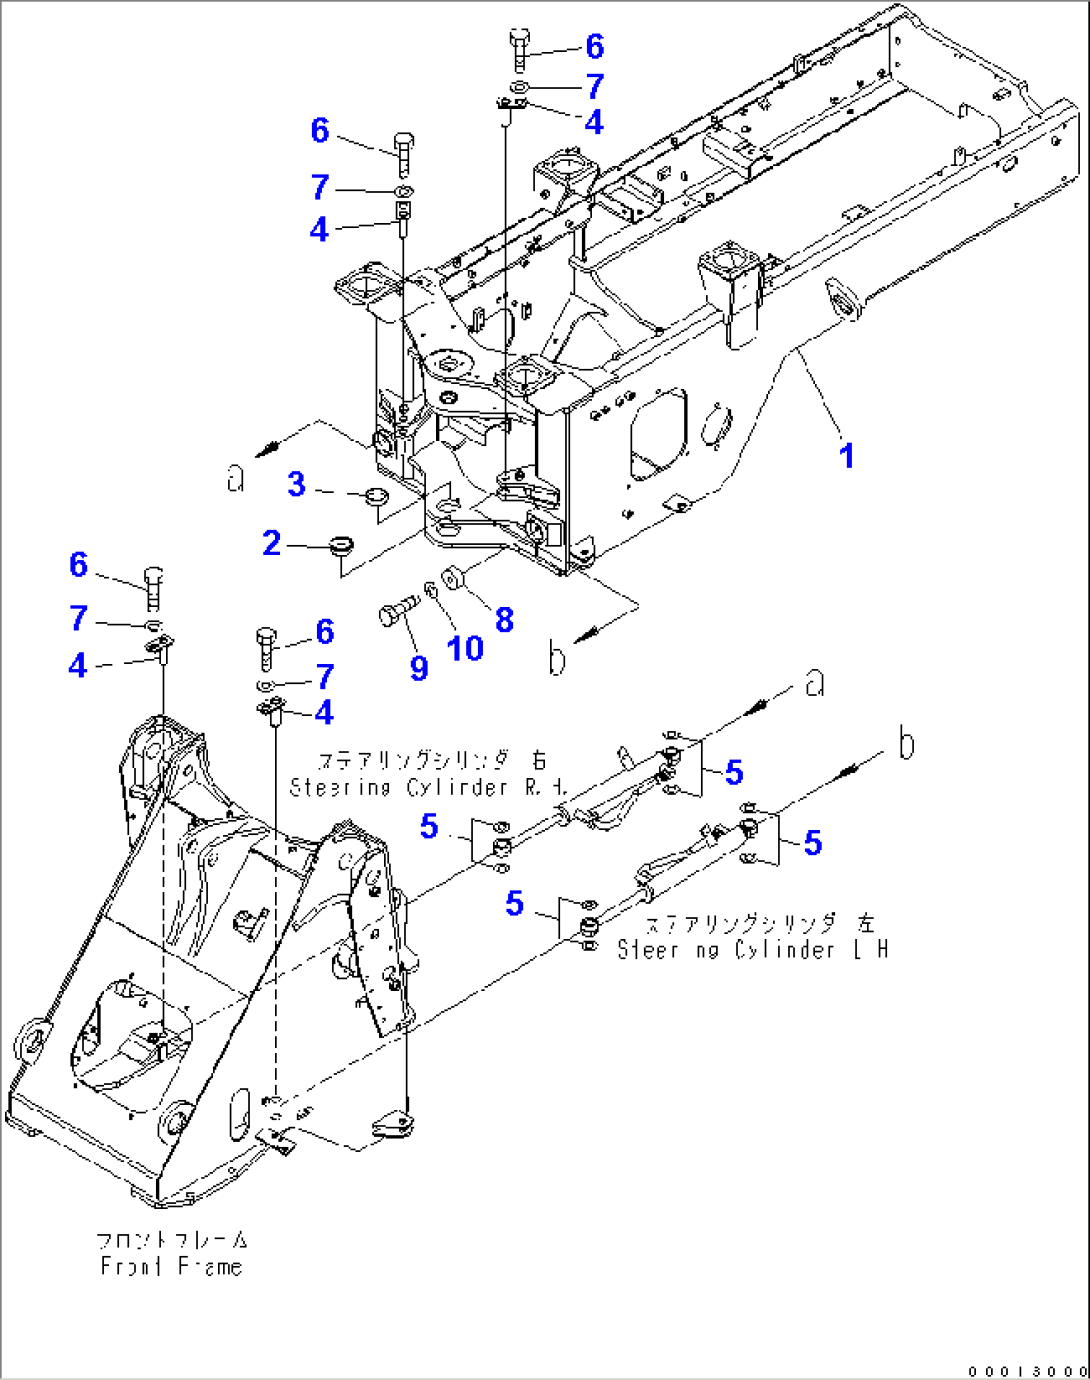 REAR FRAME (FOR ADD COUNTER WEIGHT)